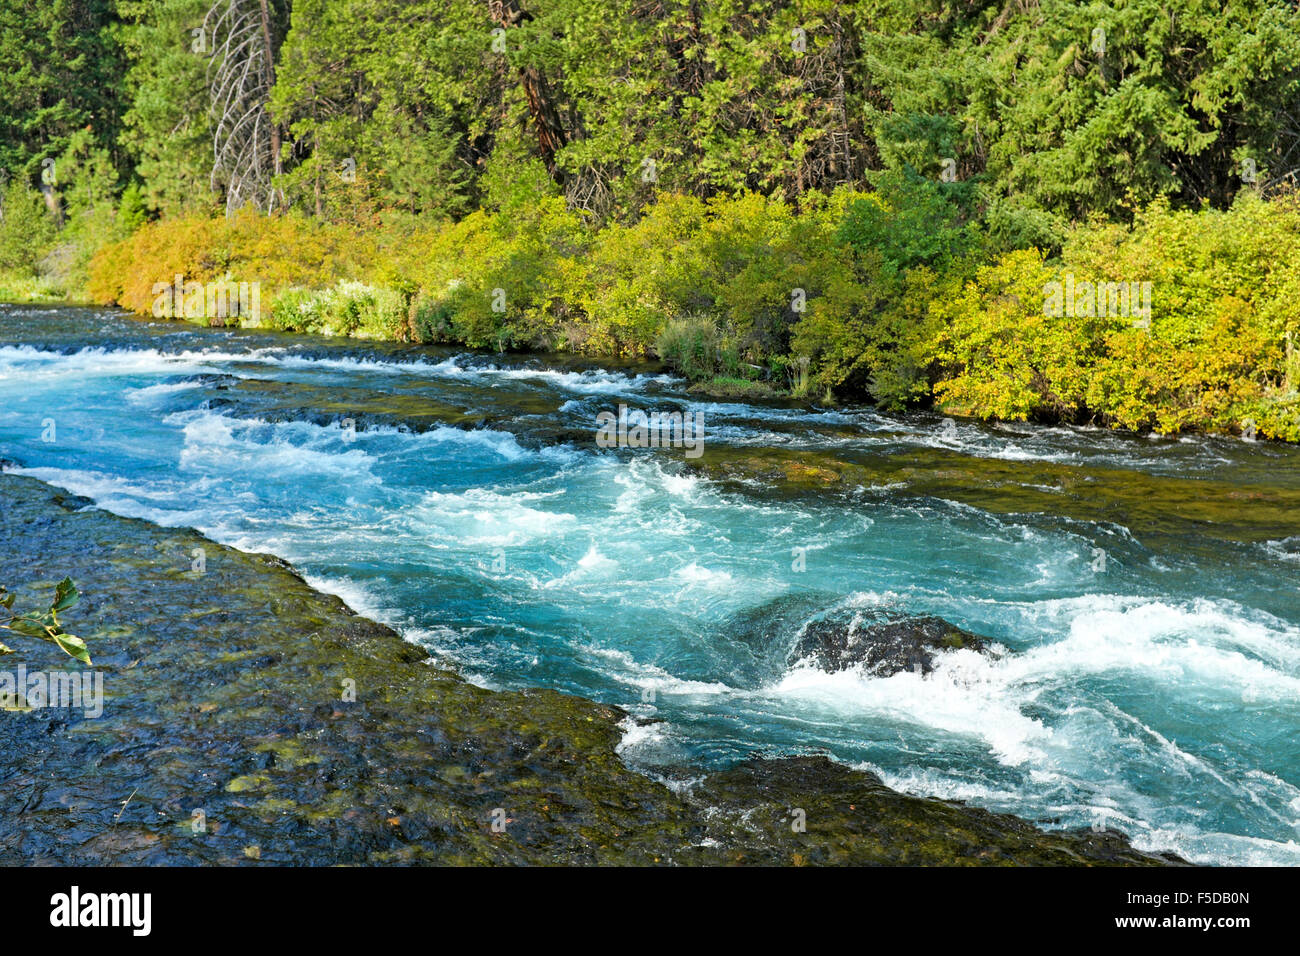 The Metolius River in the Cascade Mountains near Sisters, Oregon Stock Photo